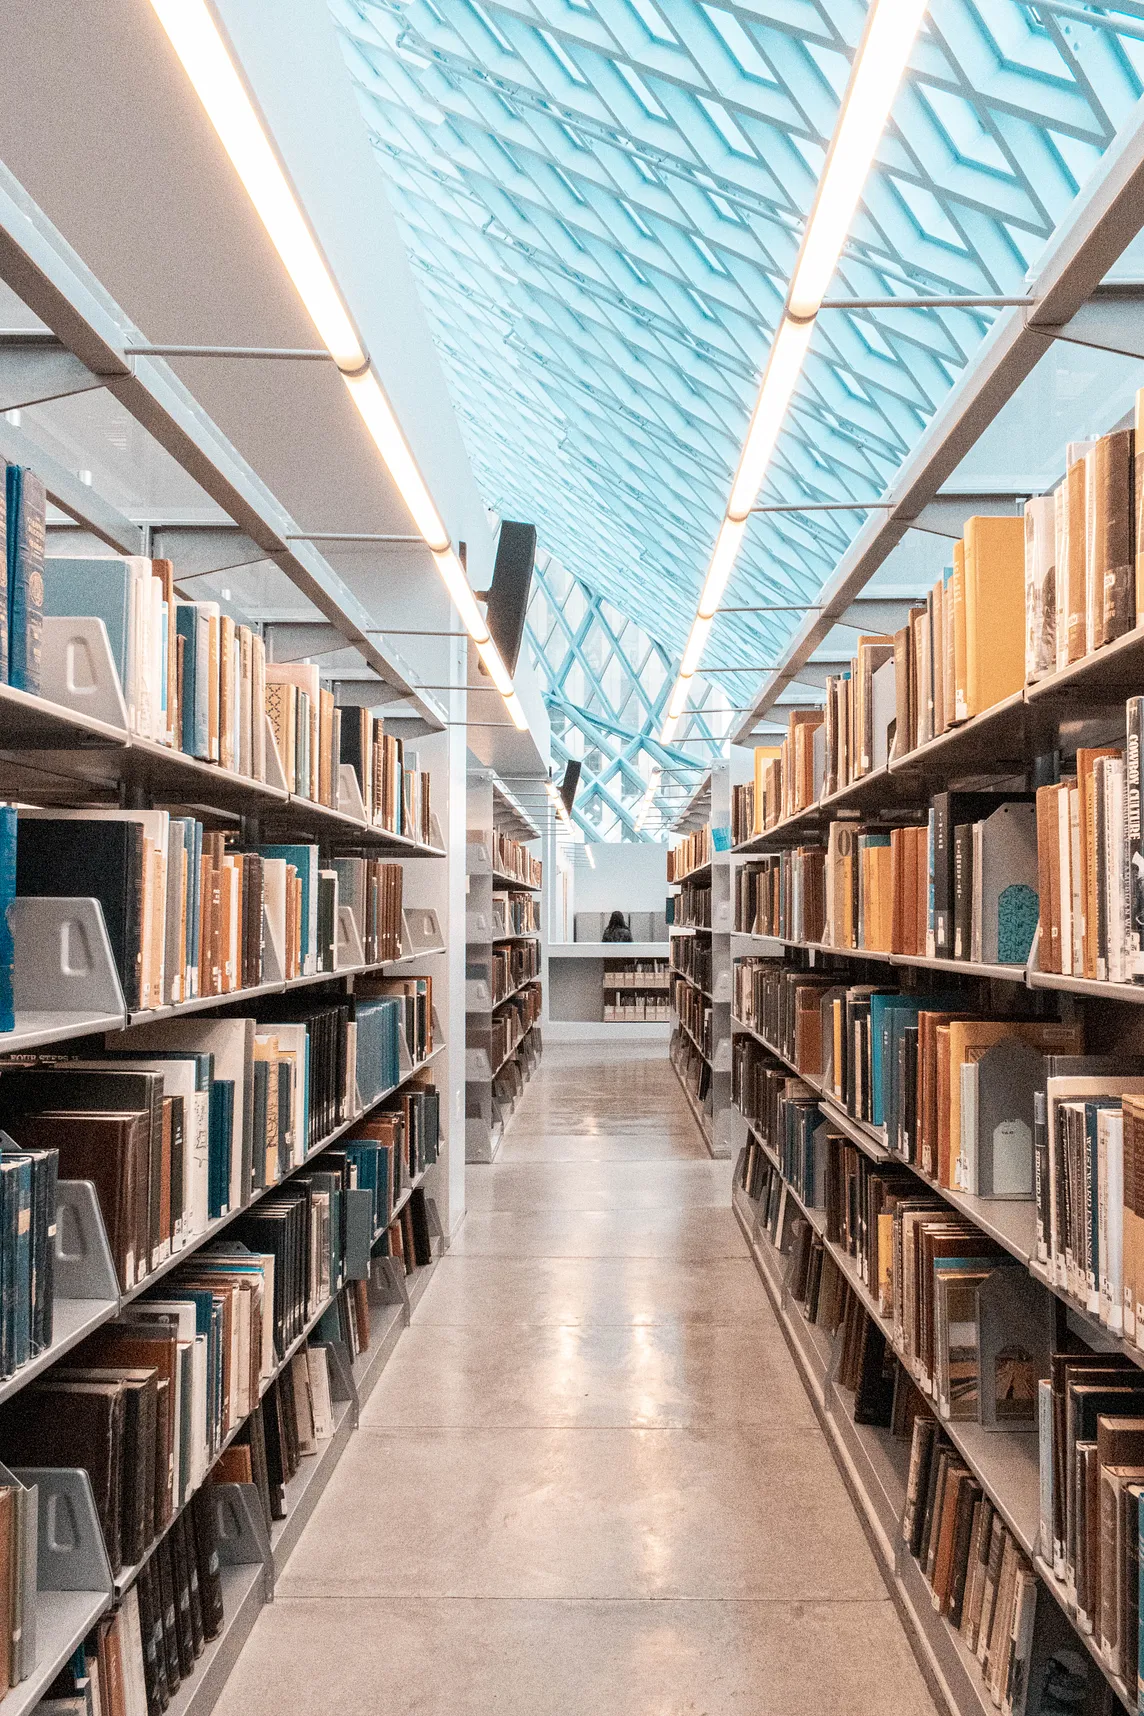 Public and Academic Libraries: What’s the Difference?